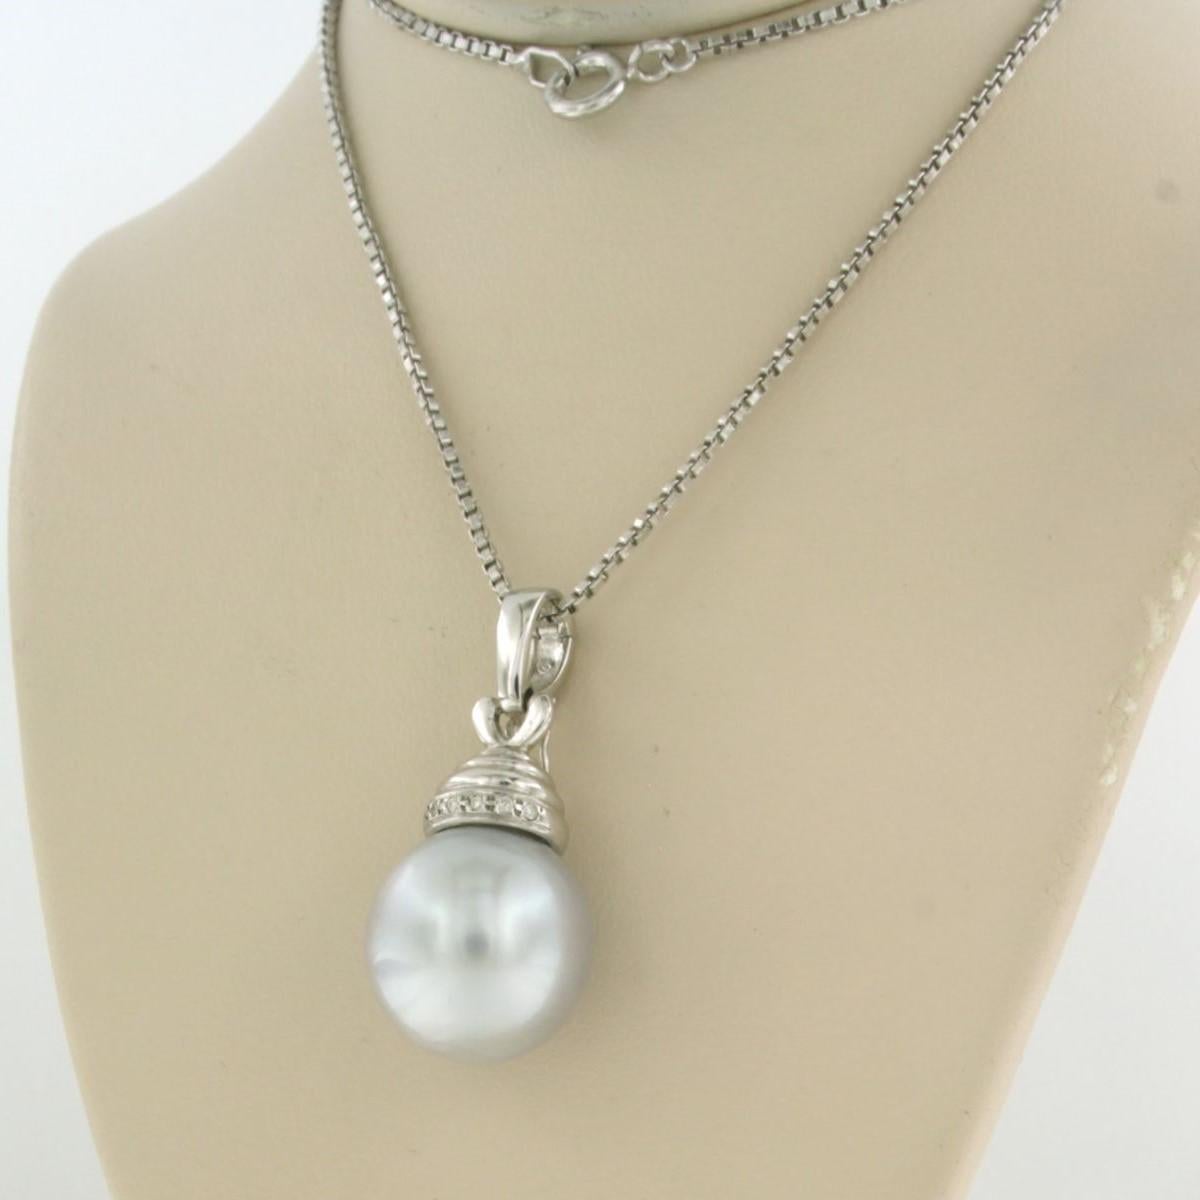 Necklace an d pendant set with pearl and diamonds 18k white gold In Good Condition For Sale In The Hague, ZH